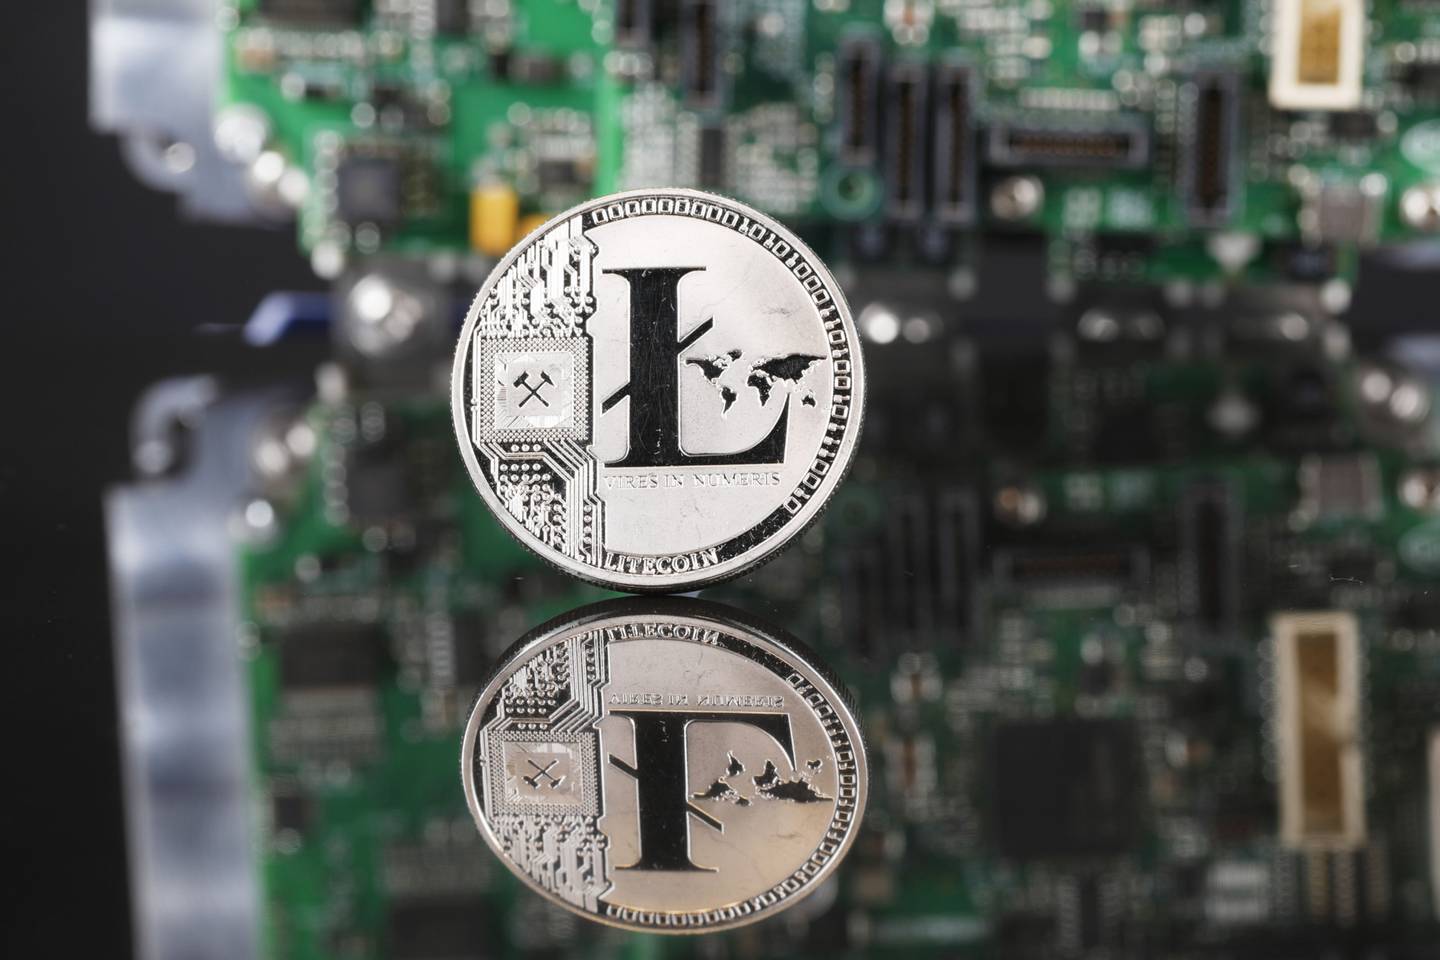 A coin representing Litecoin cryptocurrency in London, U.K.